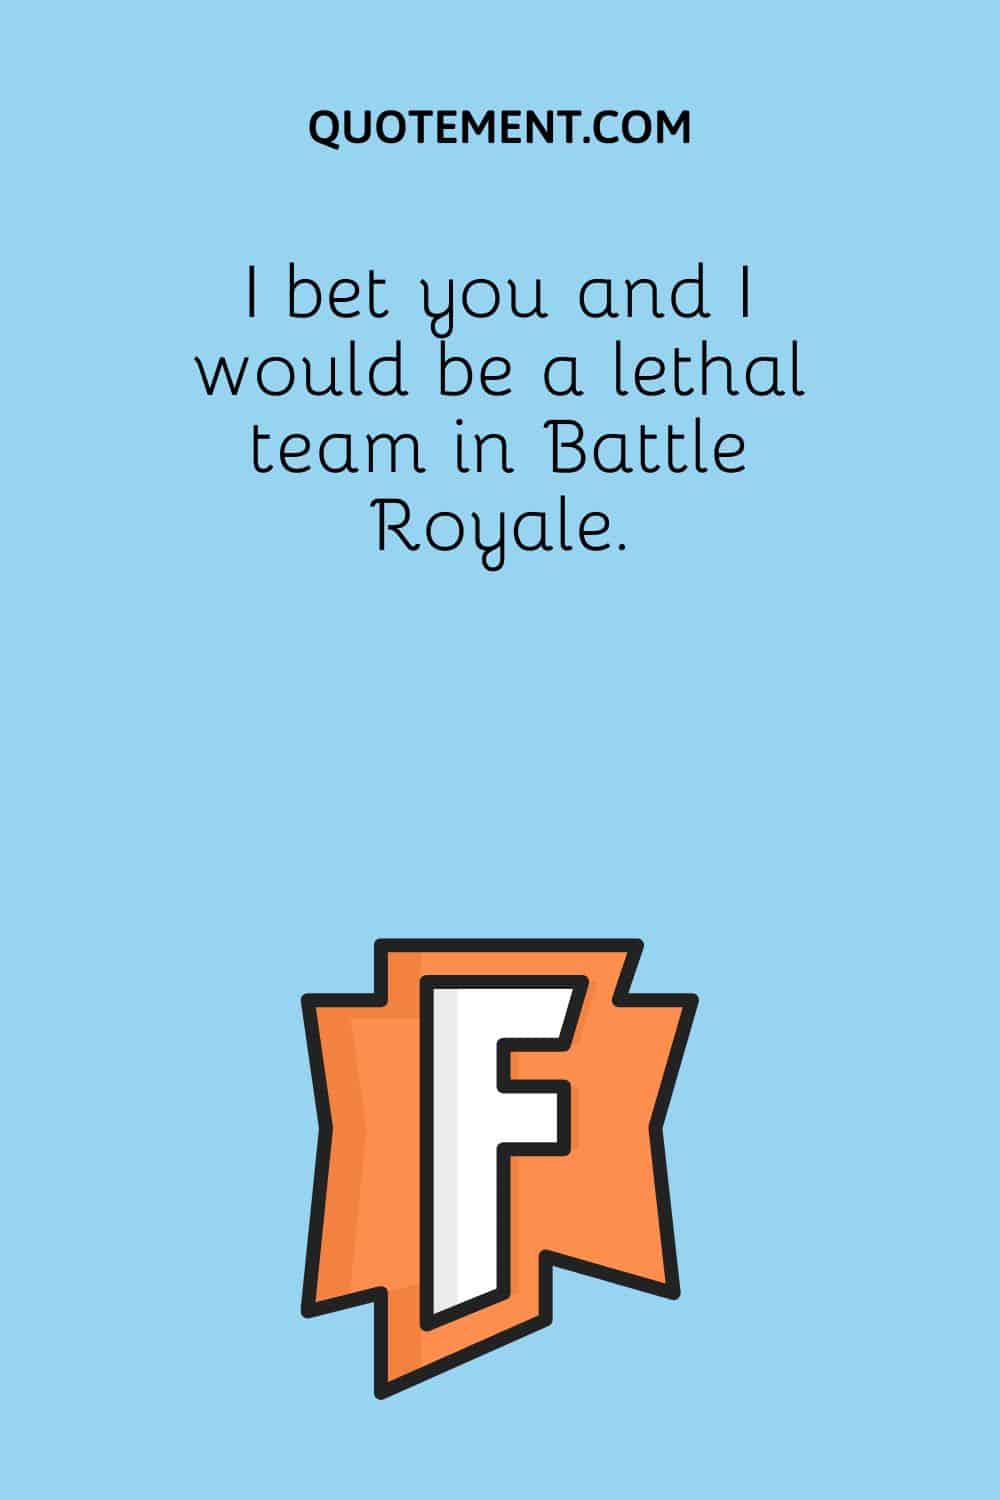 I bet you and I would be a lethal team in Battle Royale